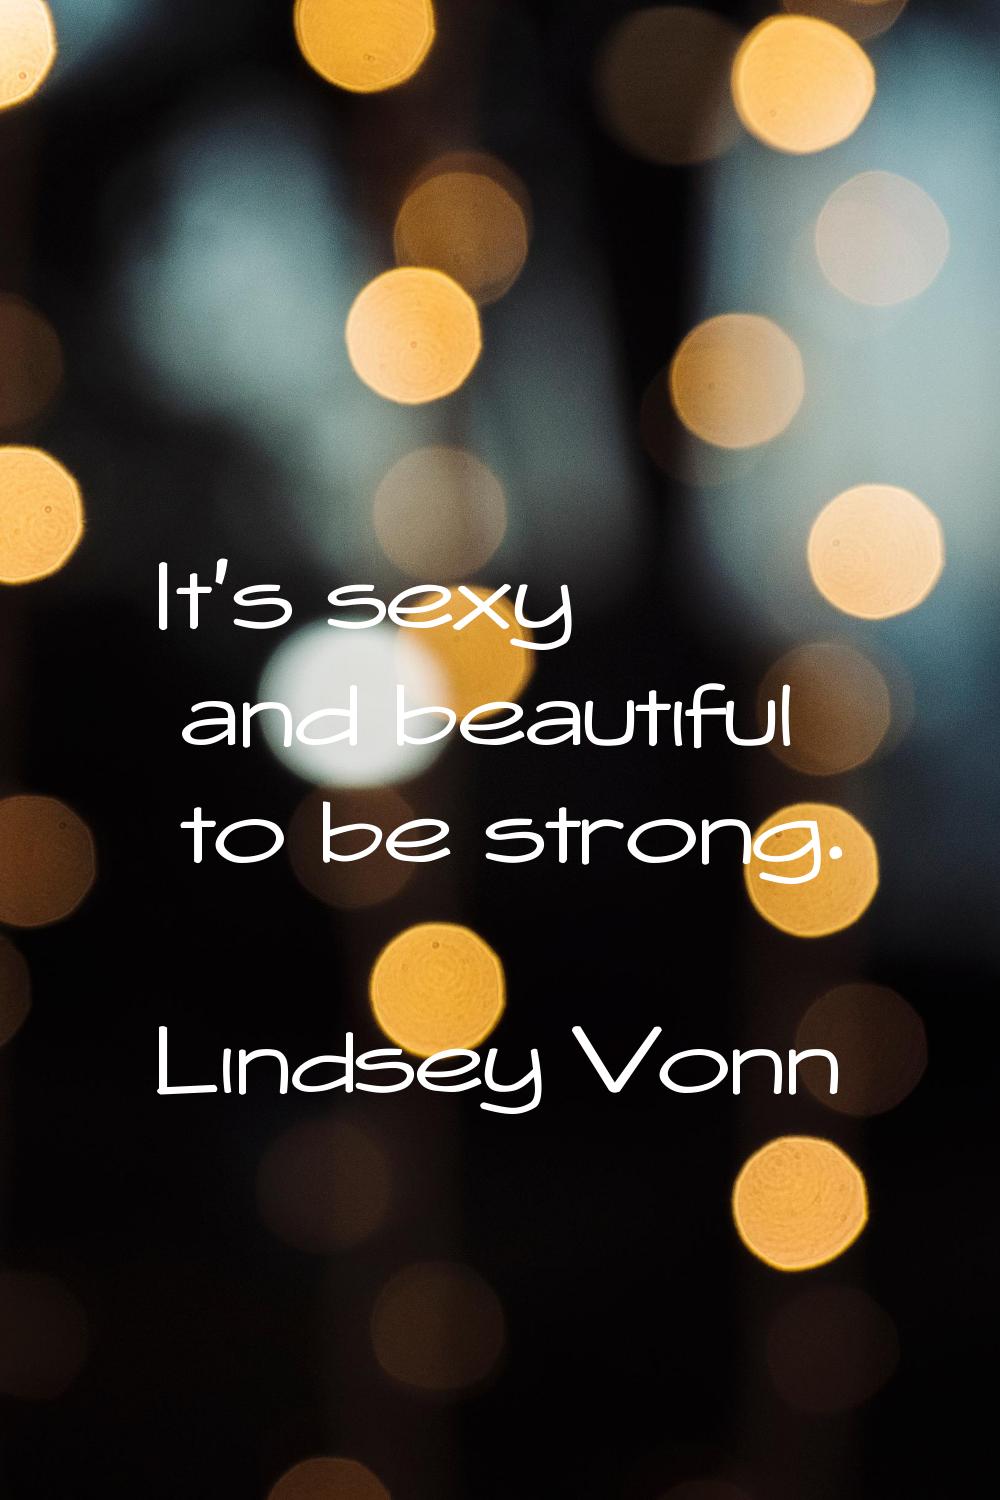 It's sexy and beautiful to be strong.